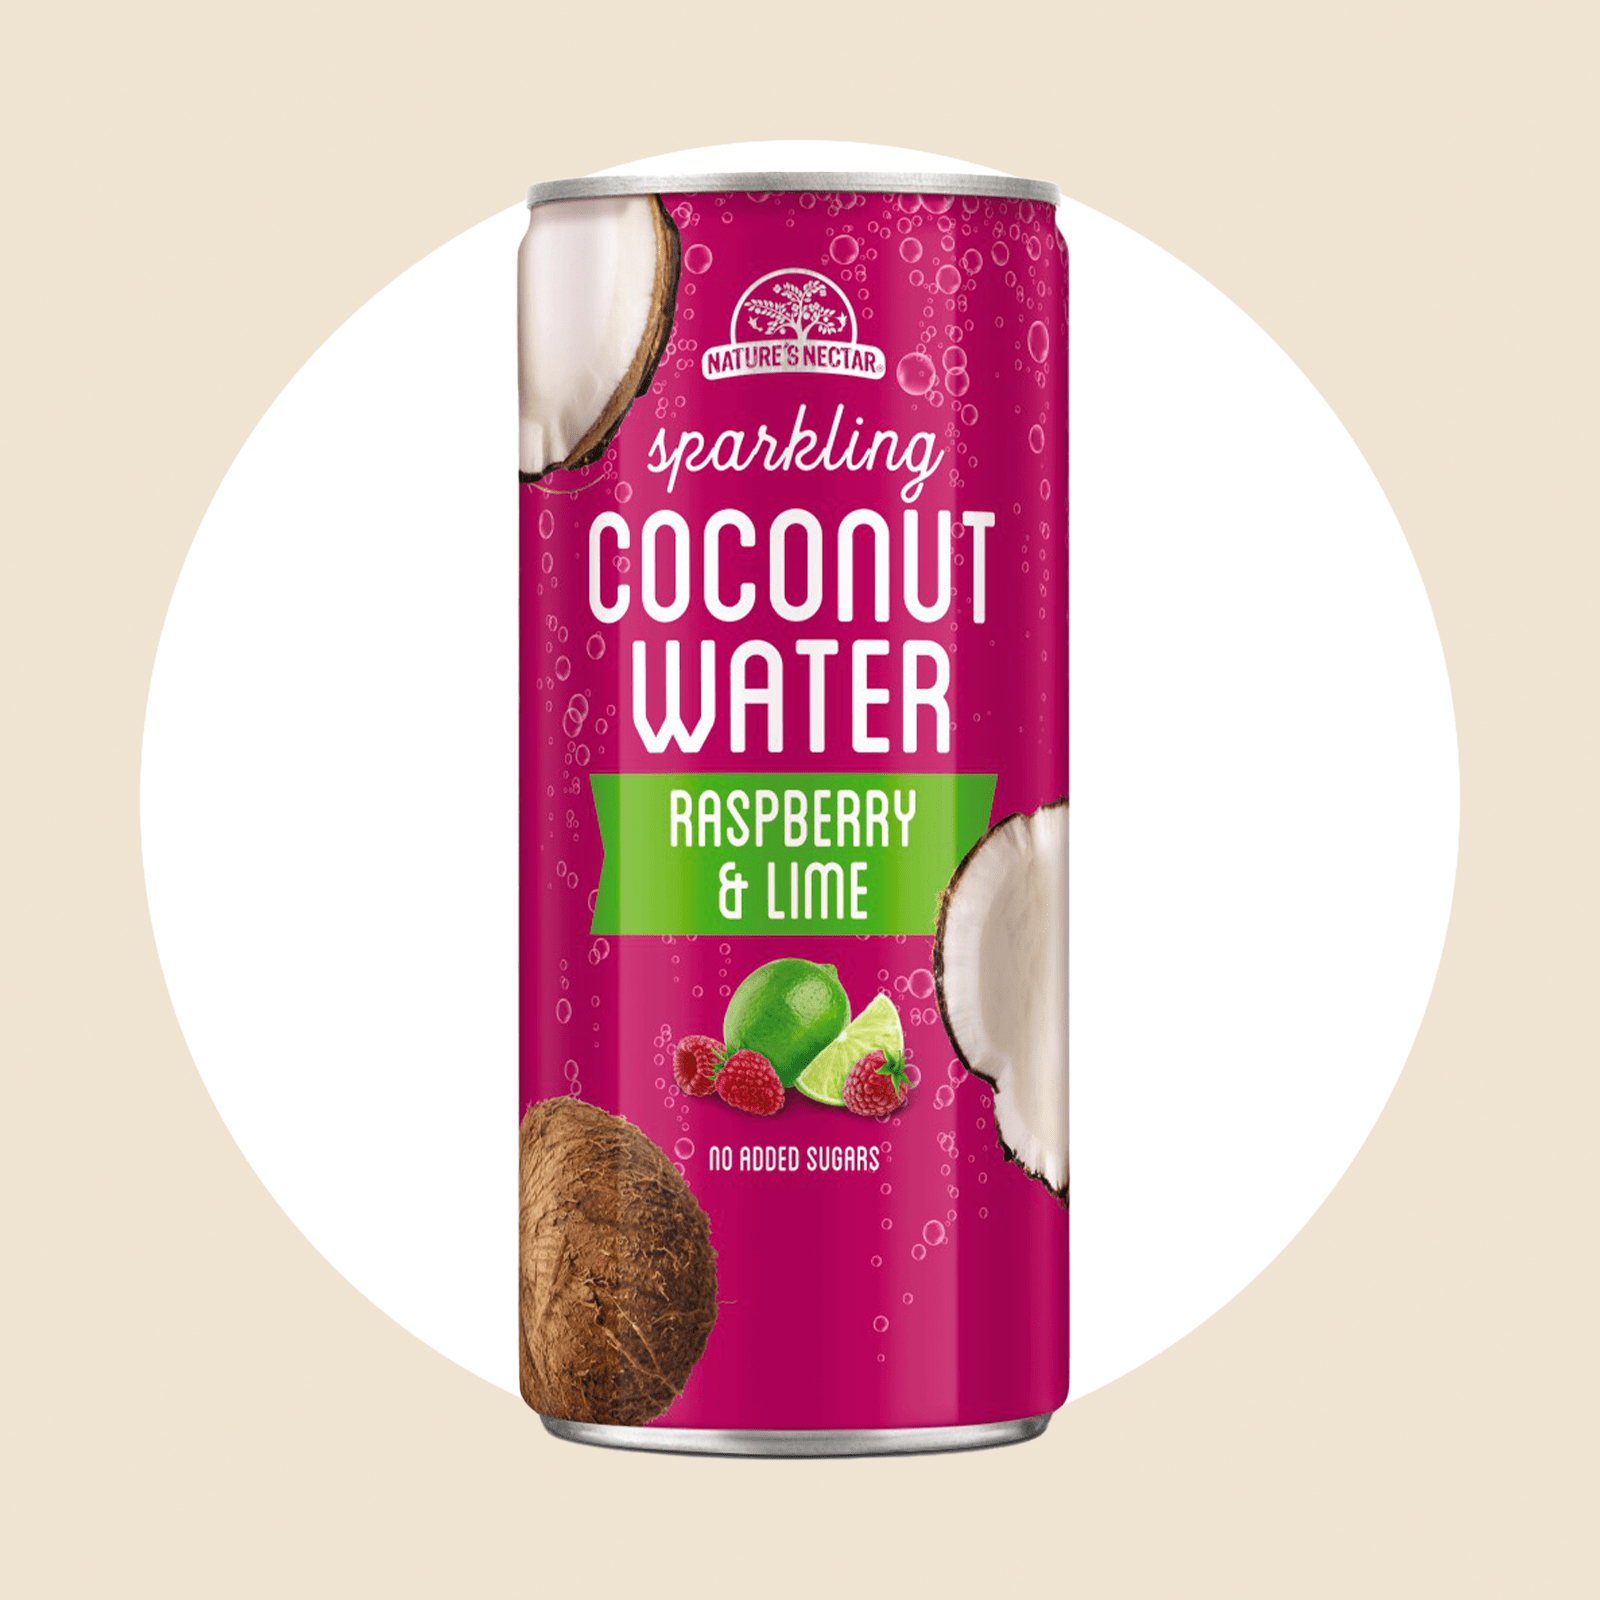 Natures Nectar Sparkling Coconut Water Assorted Varieties Courtesy Aldi